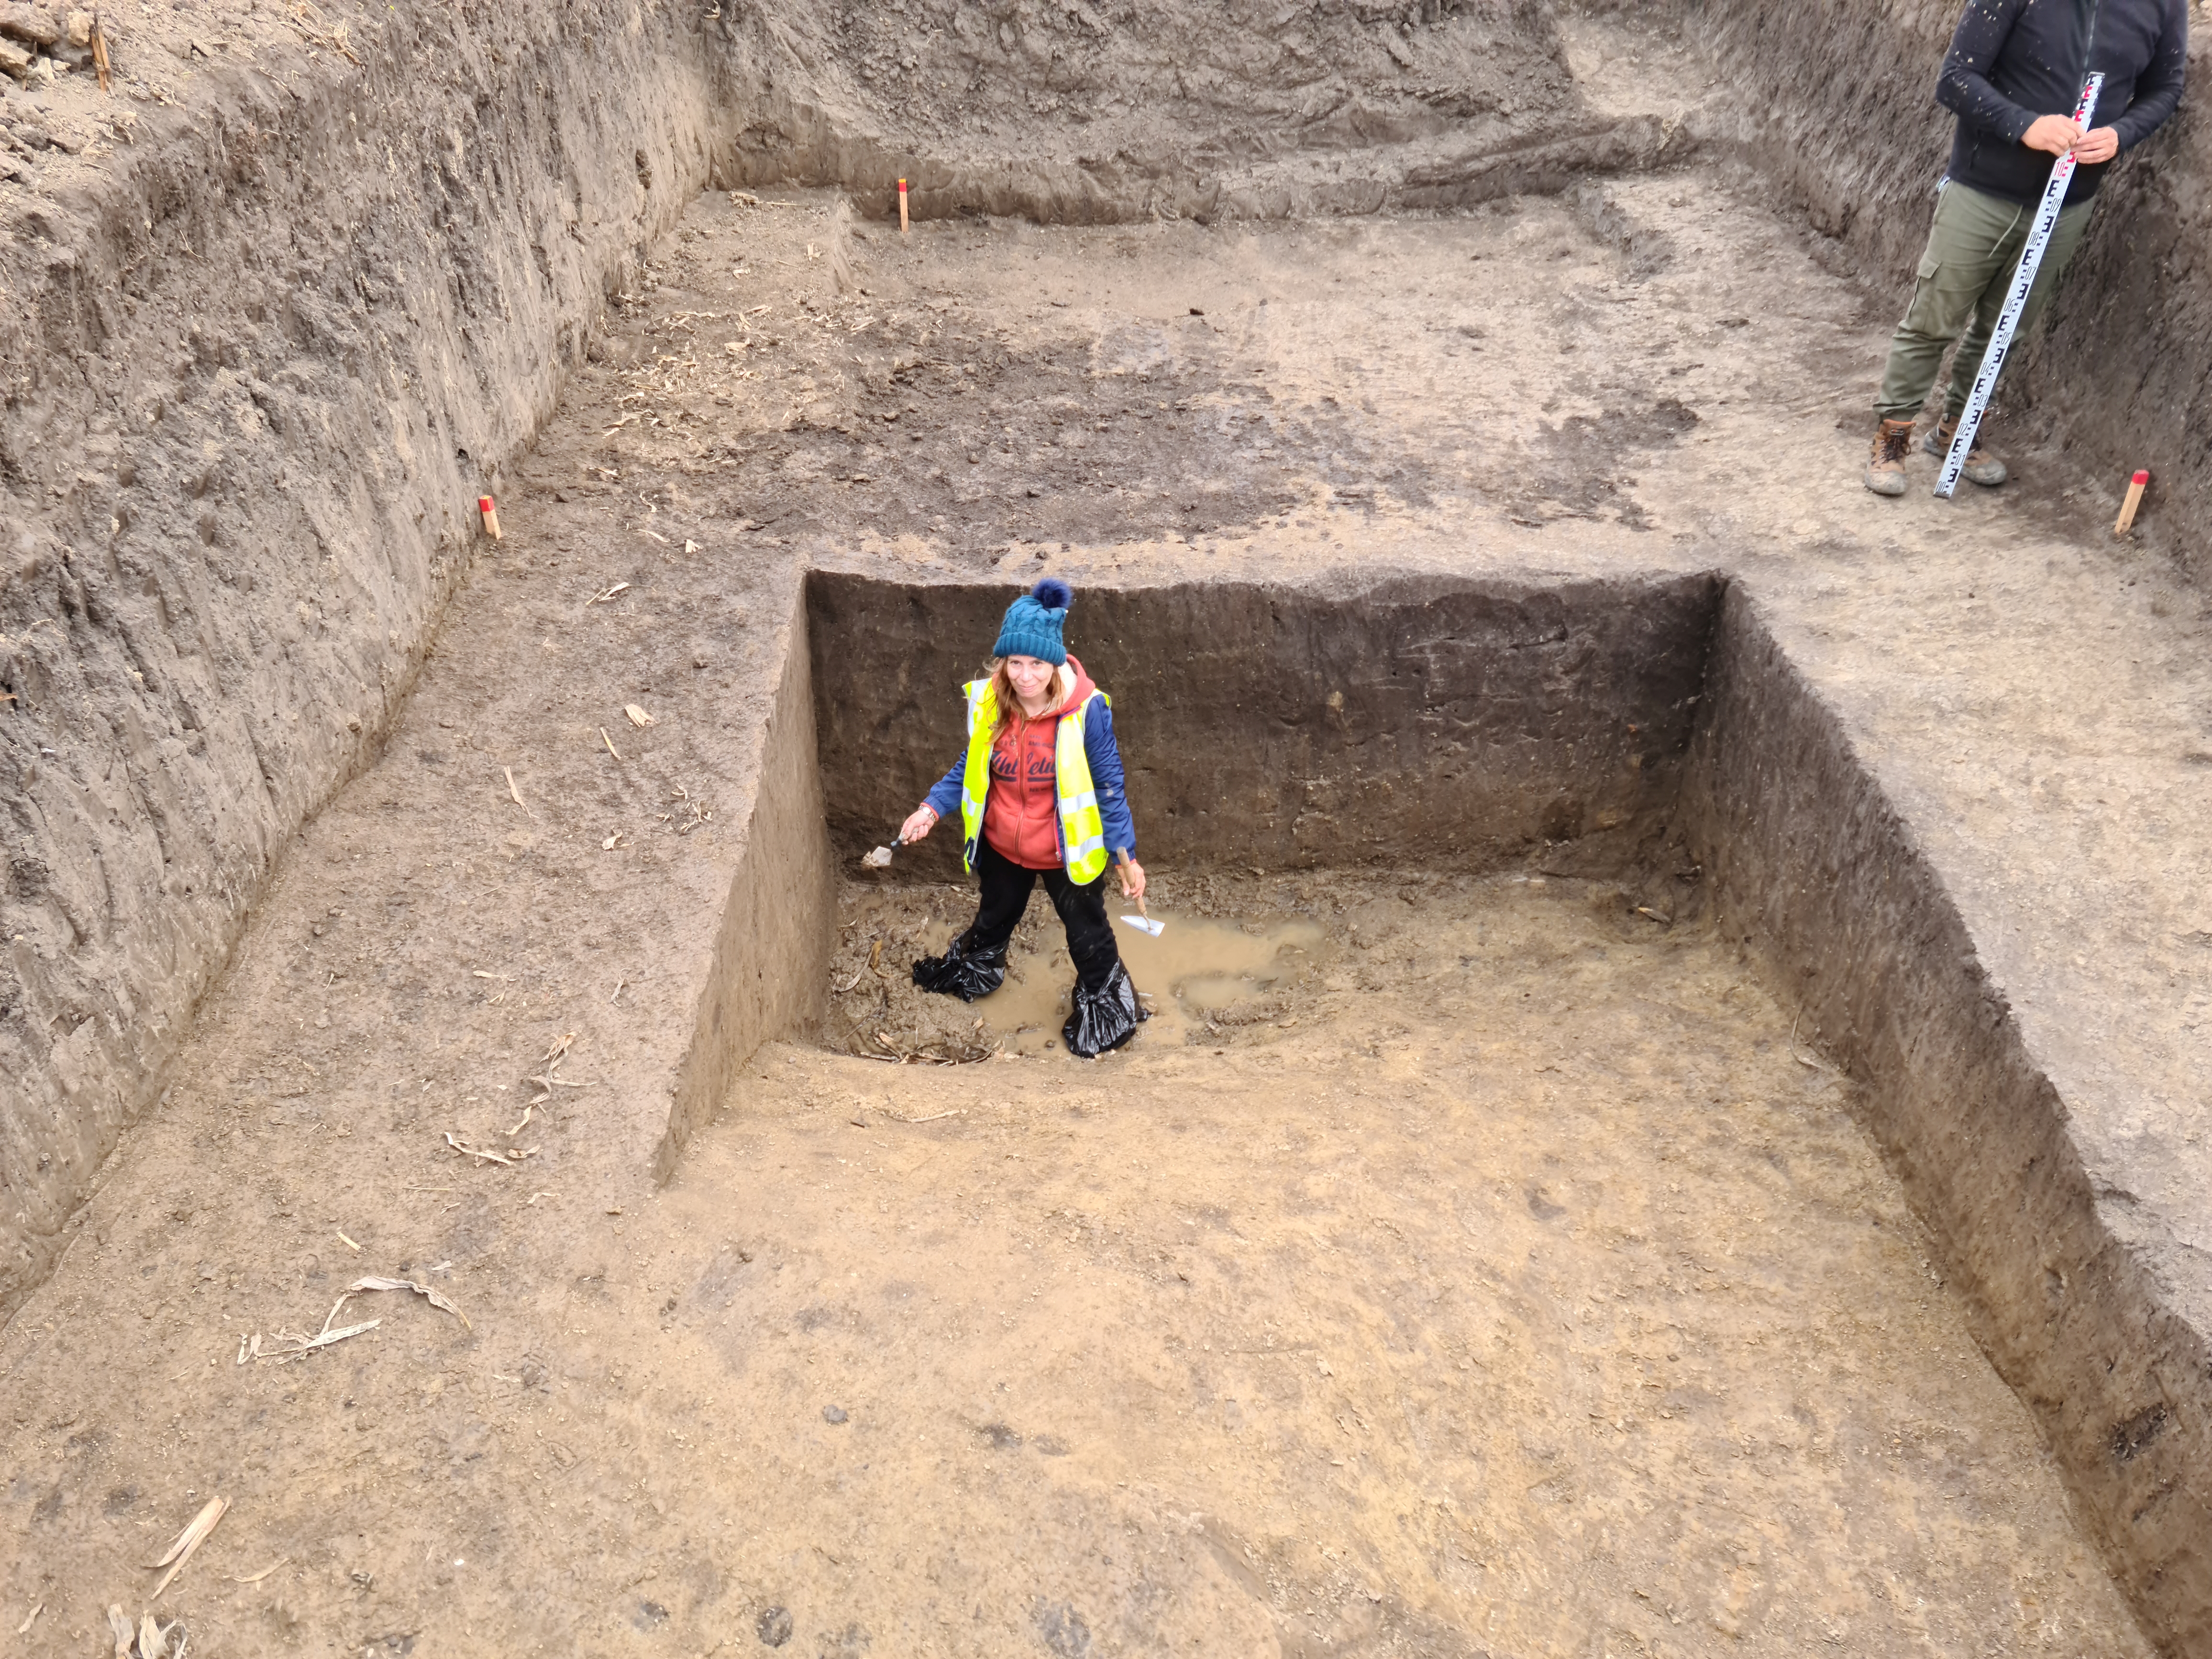 archaeologist wearing blue hat, red hoody and hi viz vest stands in deep hole at excavation site